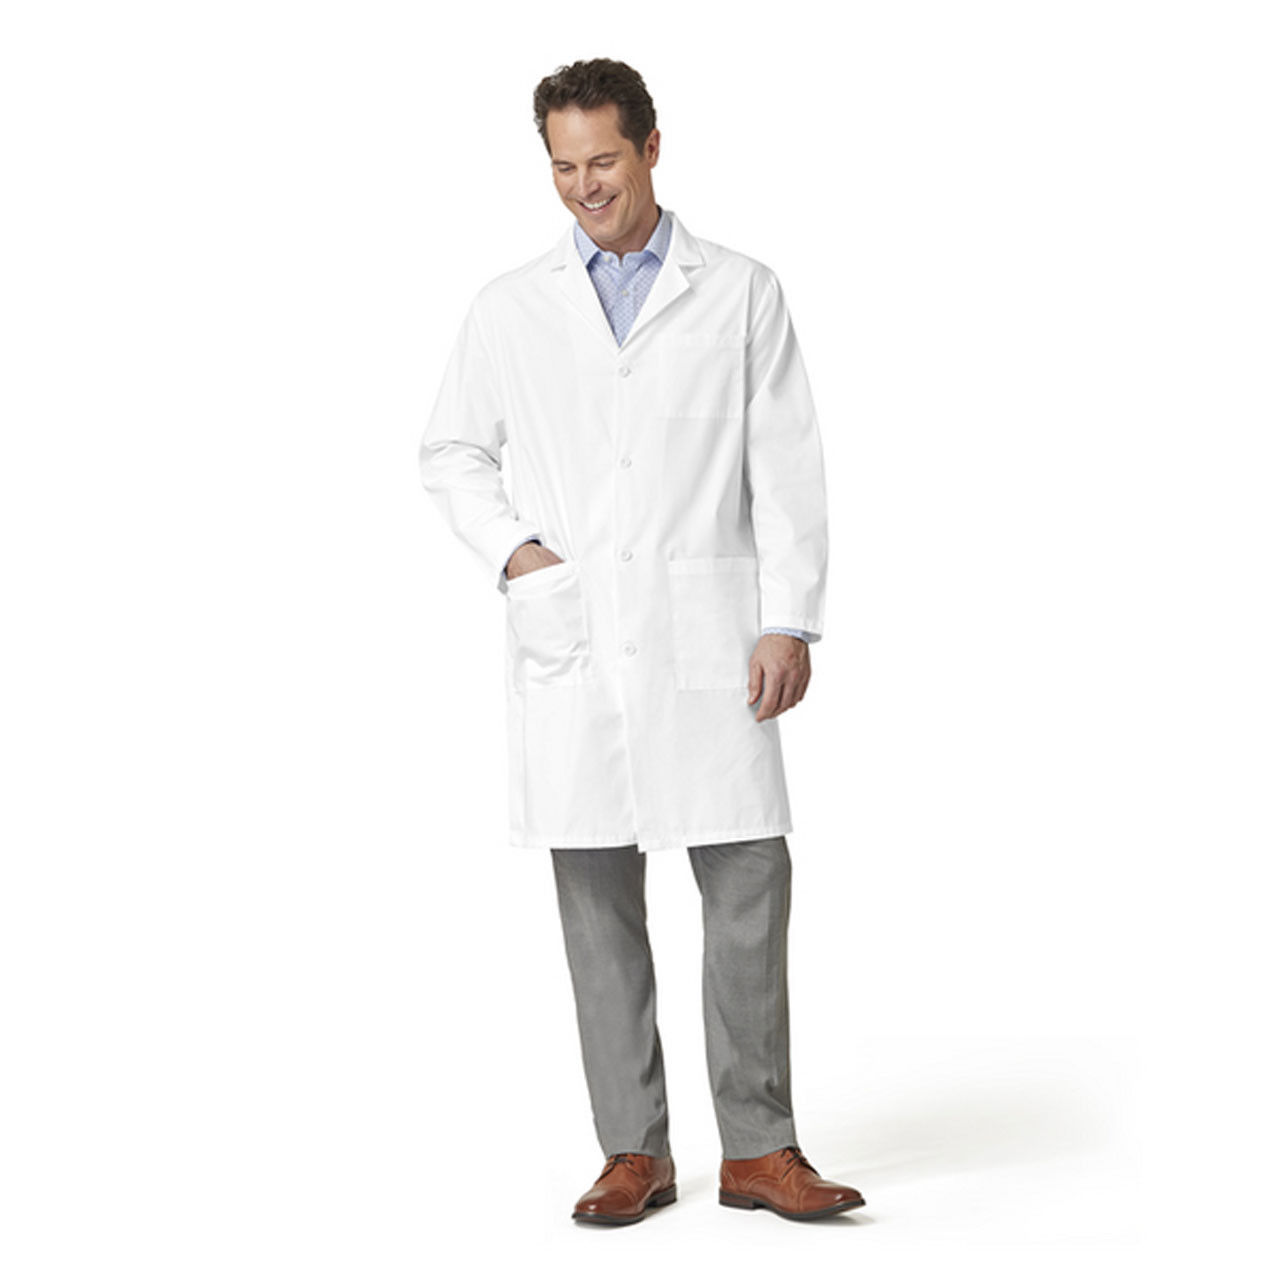 Before buying lab coats in bulk, what's the weight of the Unisex Lab Coat material?